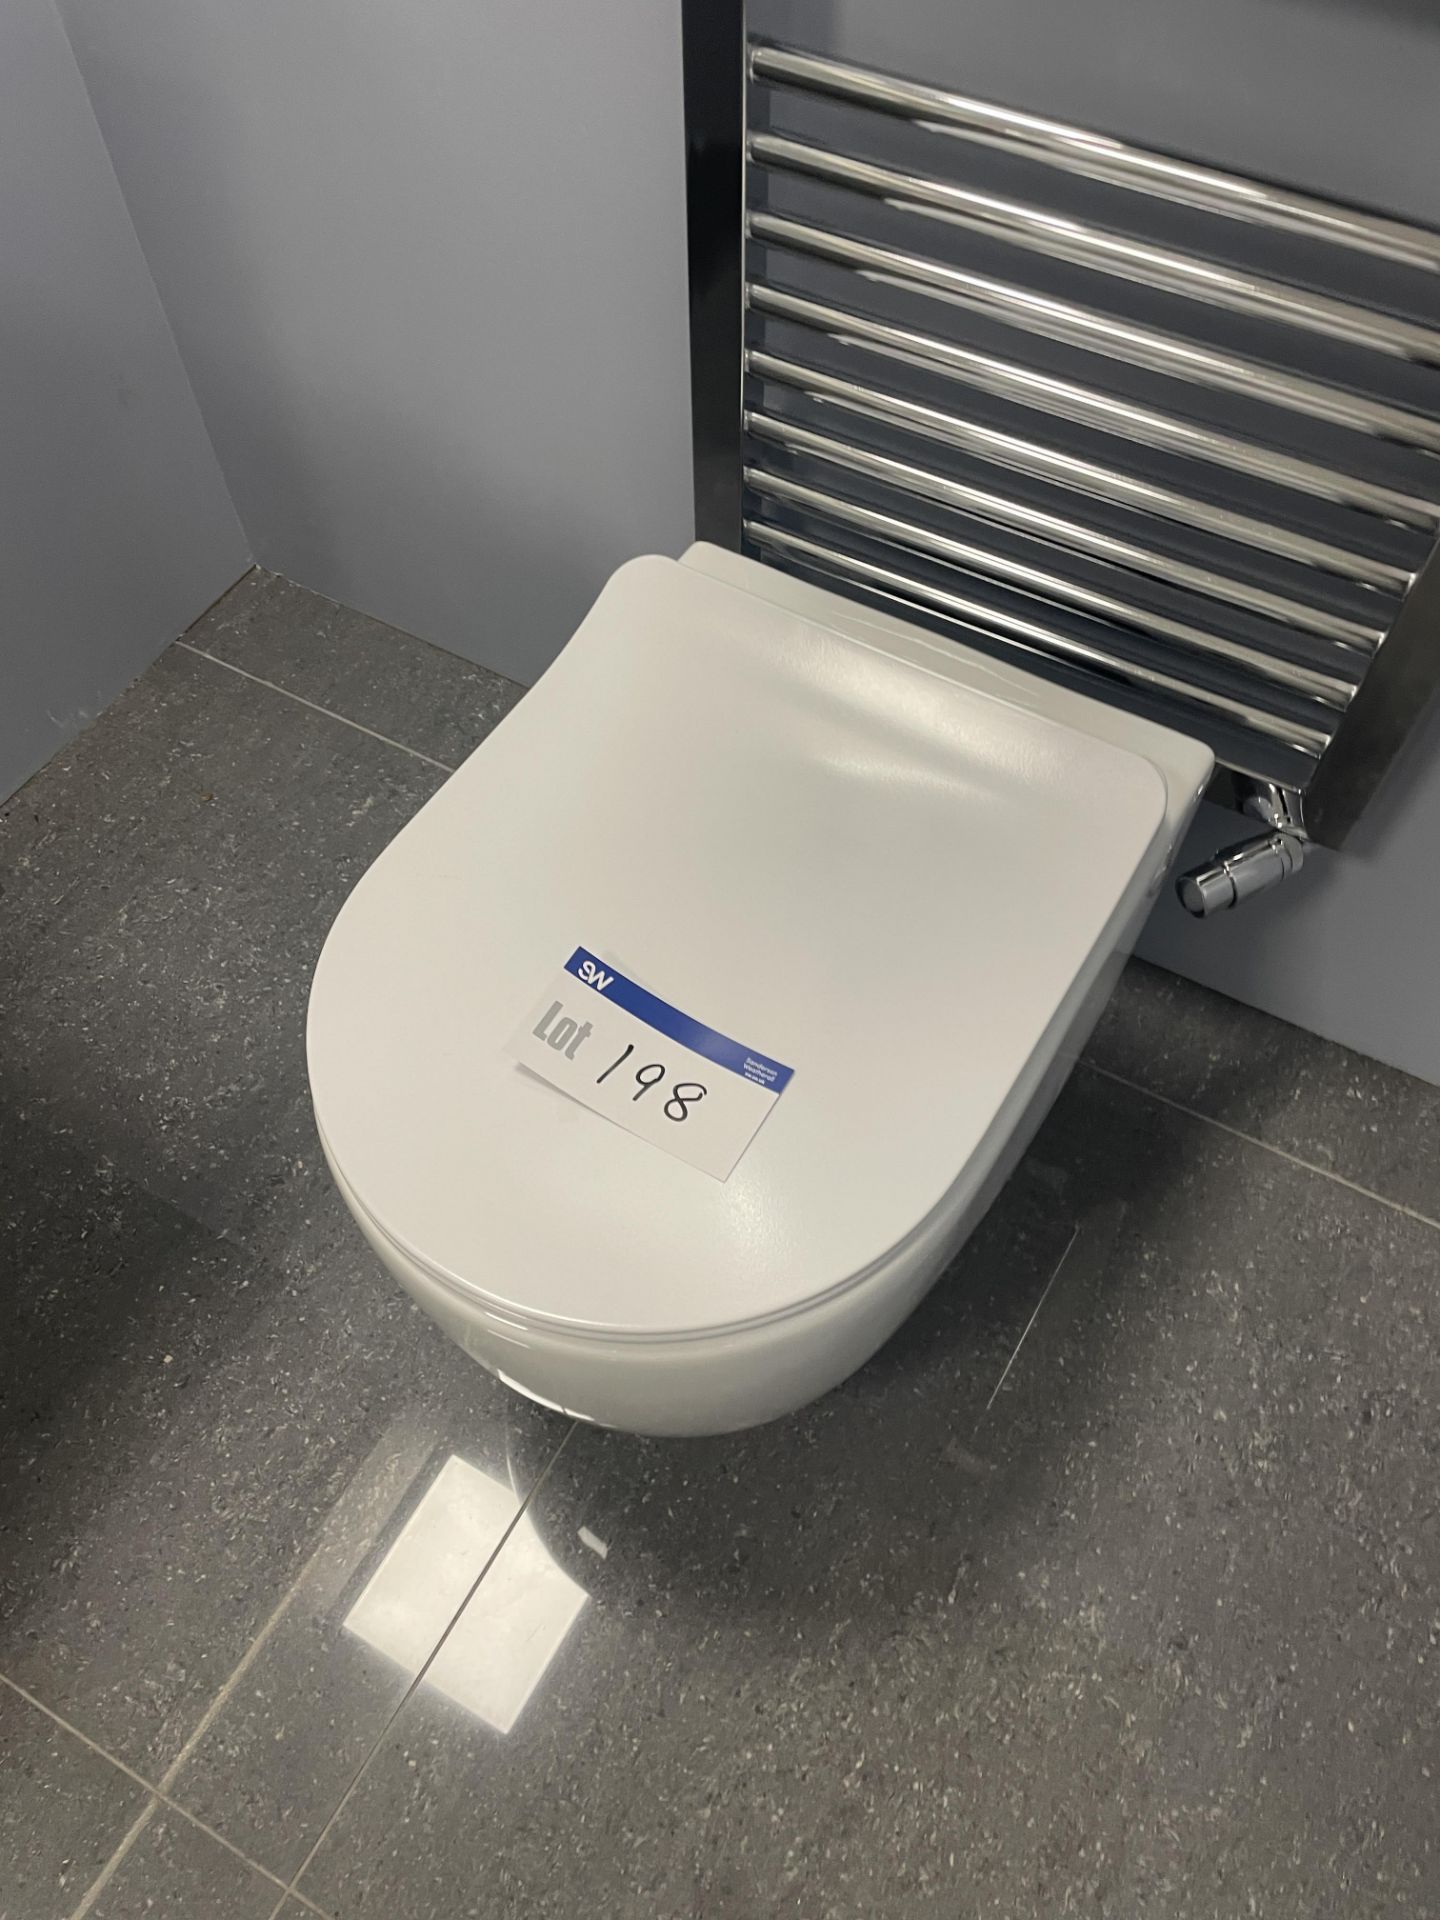 Floor Standing Toilet Please read the following important notes:- ***Overseas buyers - All lots